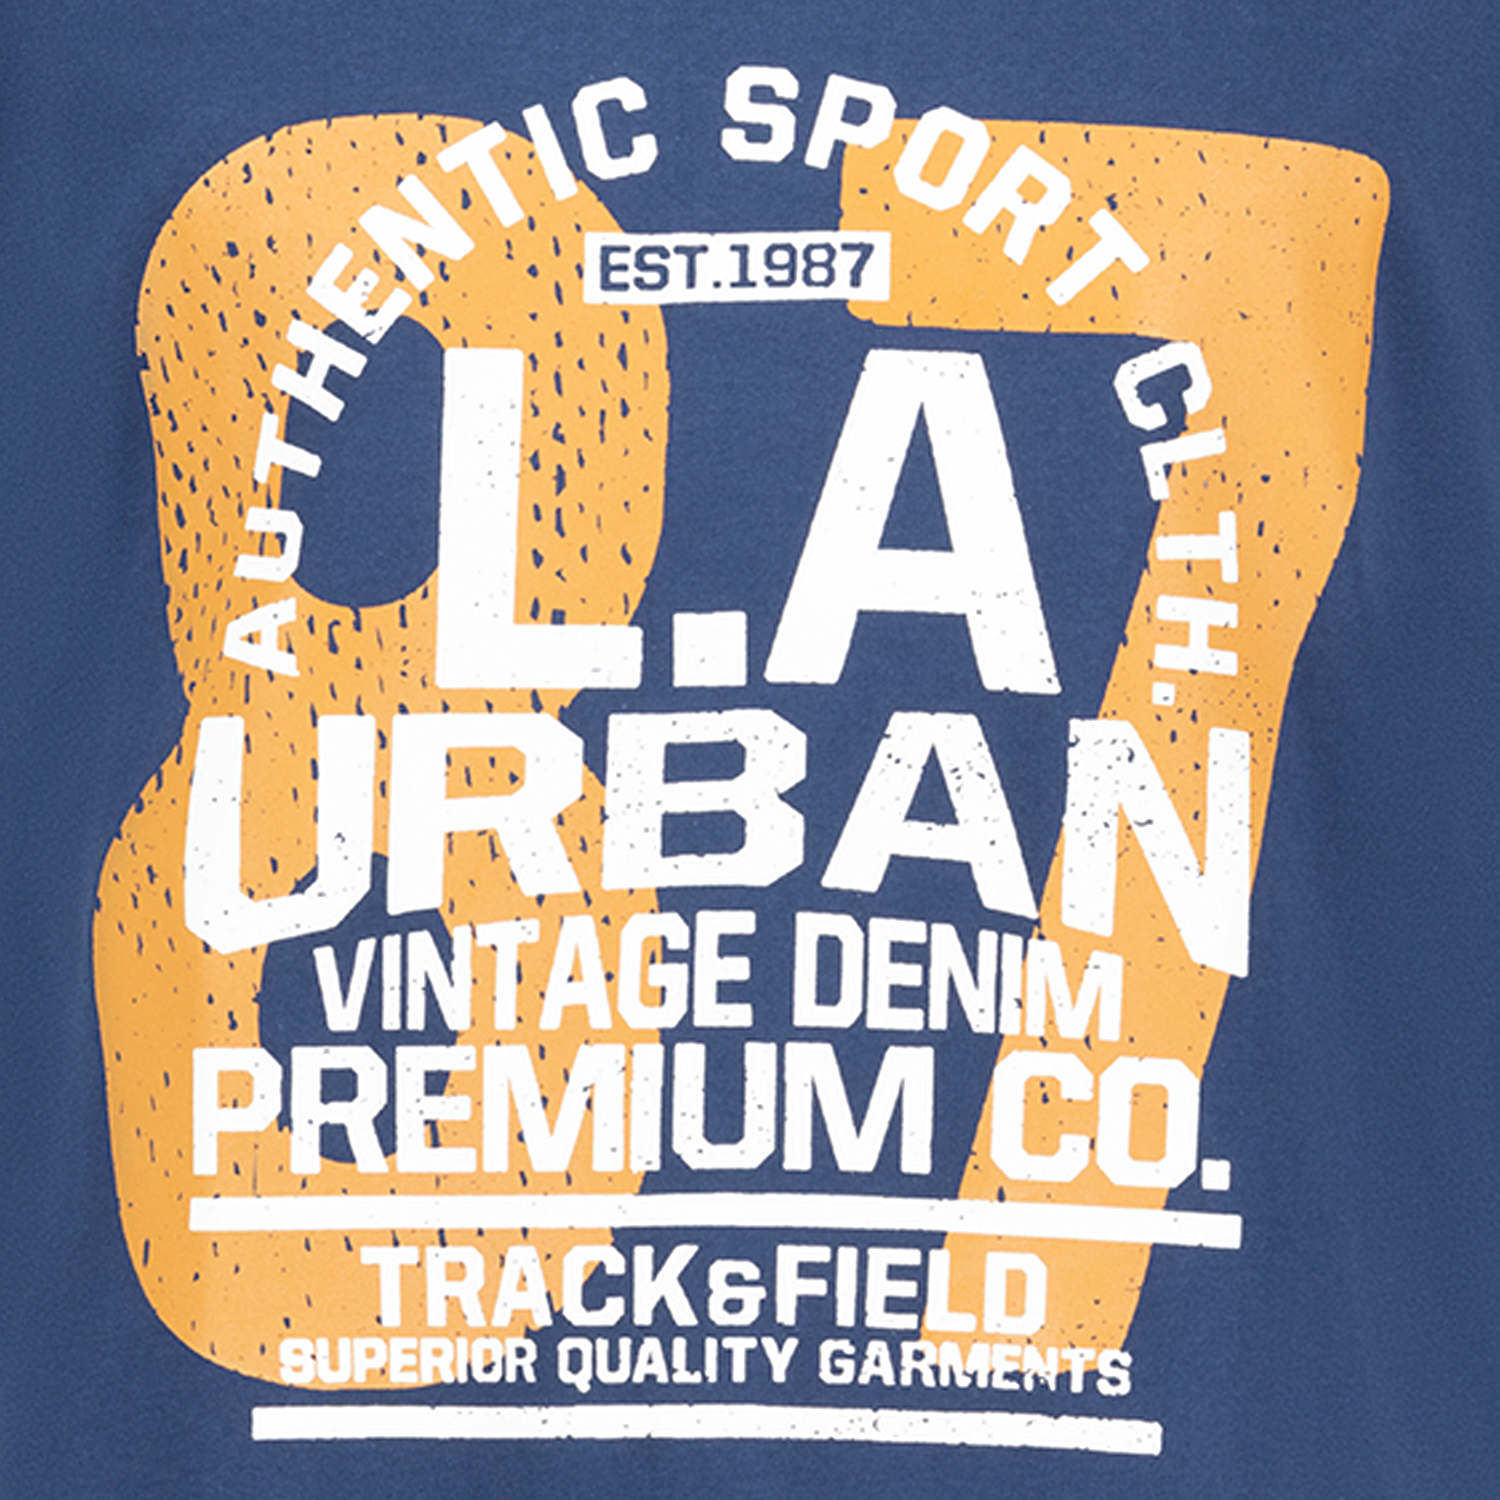 Printed muscle shirt by ADAMO denim blue in sizes 2XL-12XL series "Urban" COMFORT FIT